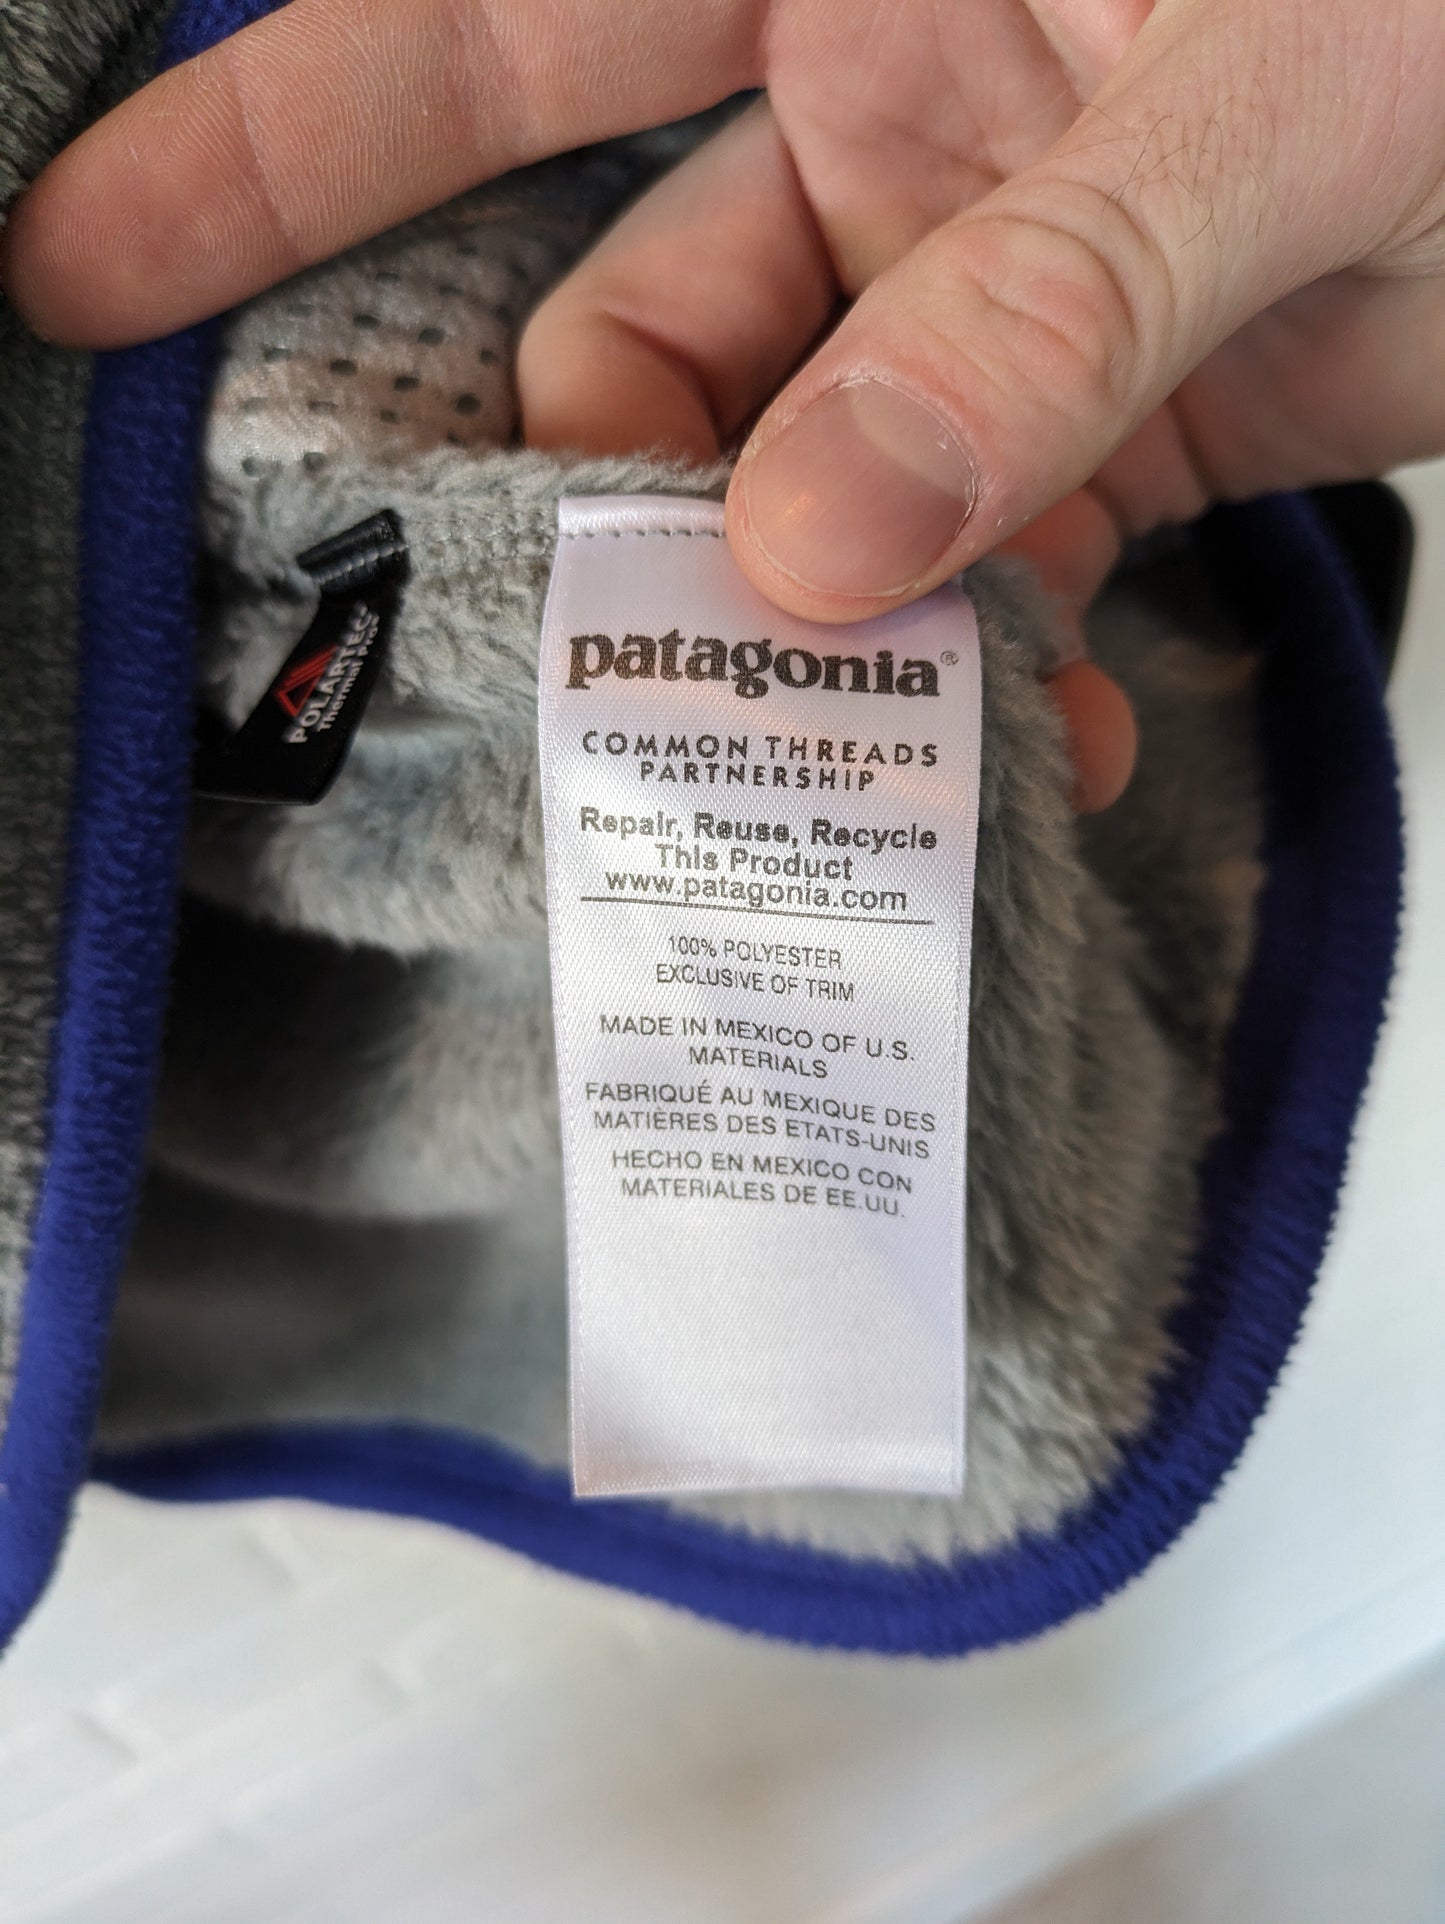 Jacket Fleece By Patagonia  Size: S